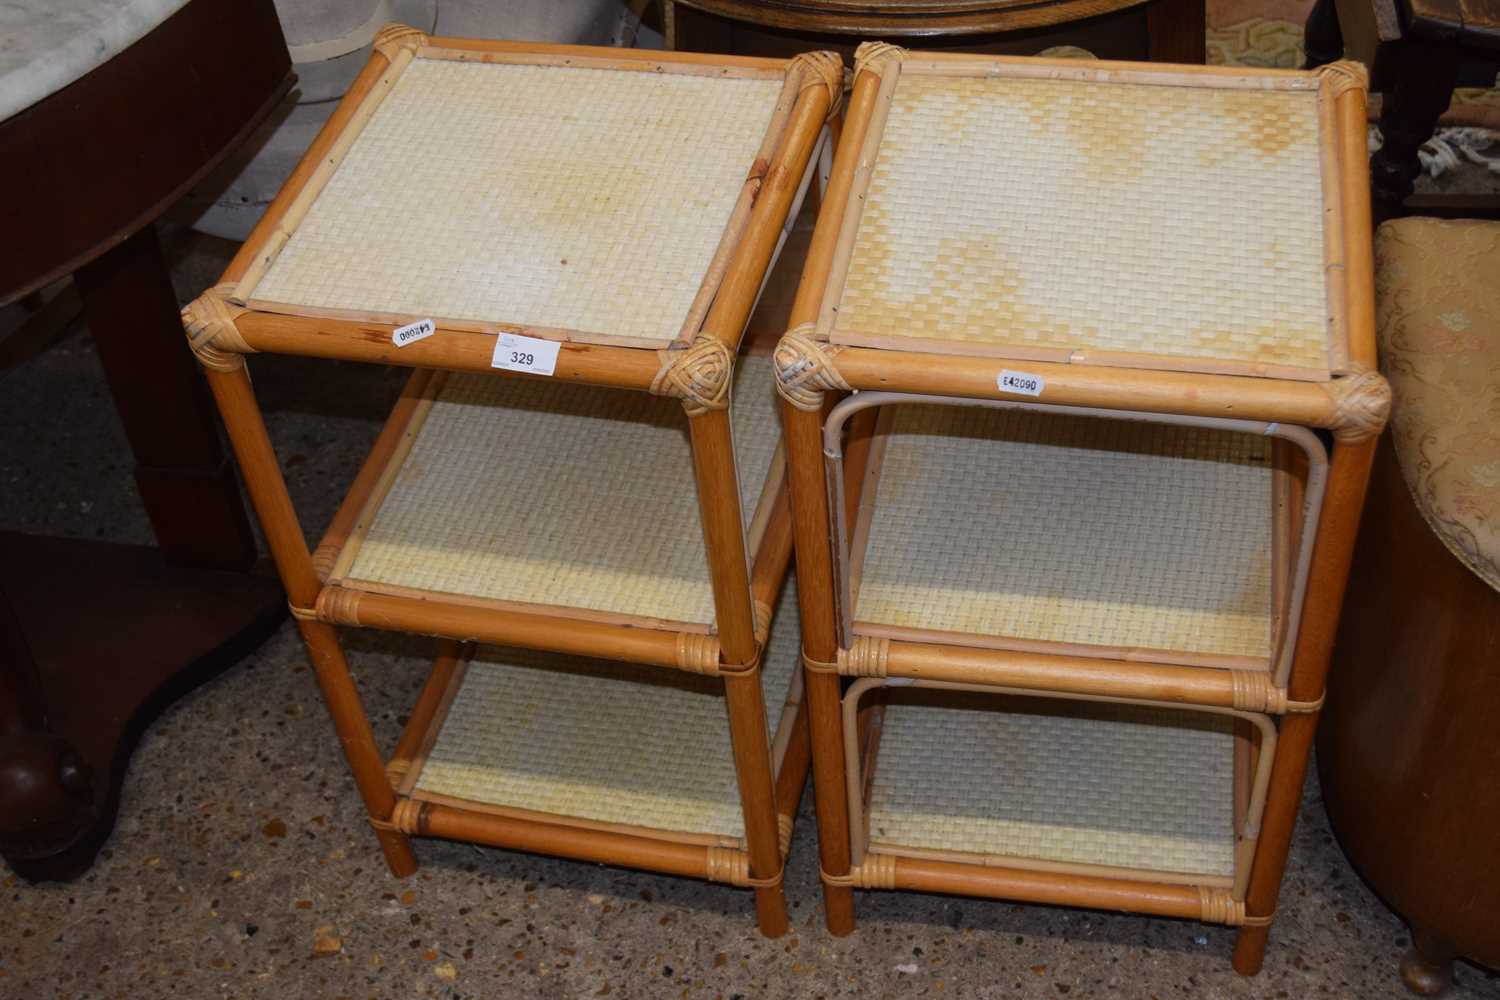 A pair of bamboo framed shelf units